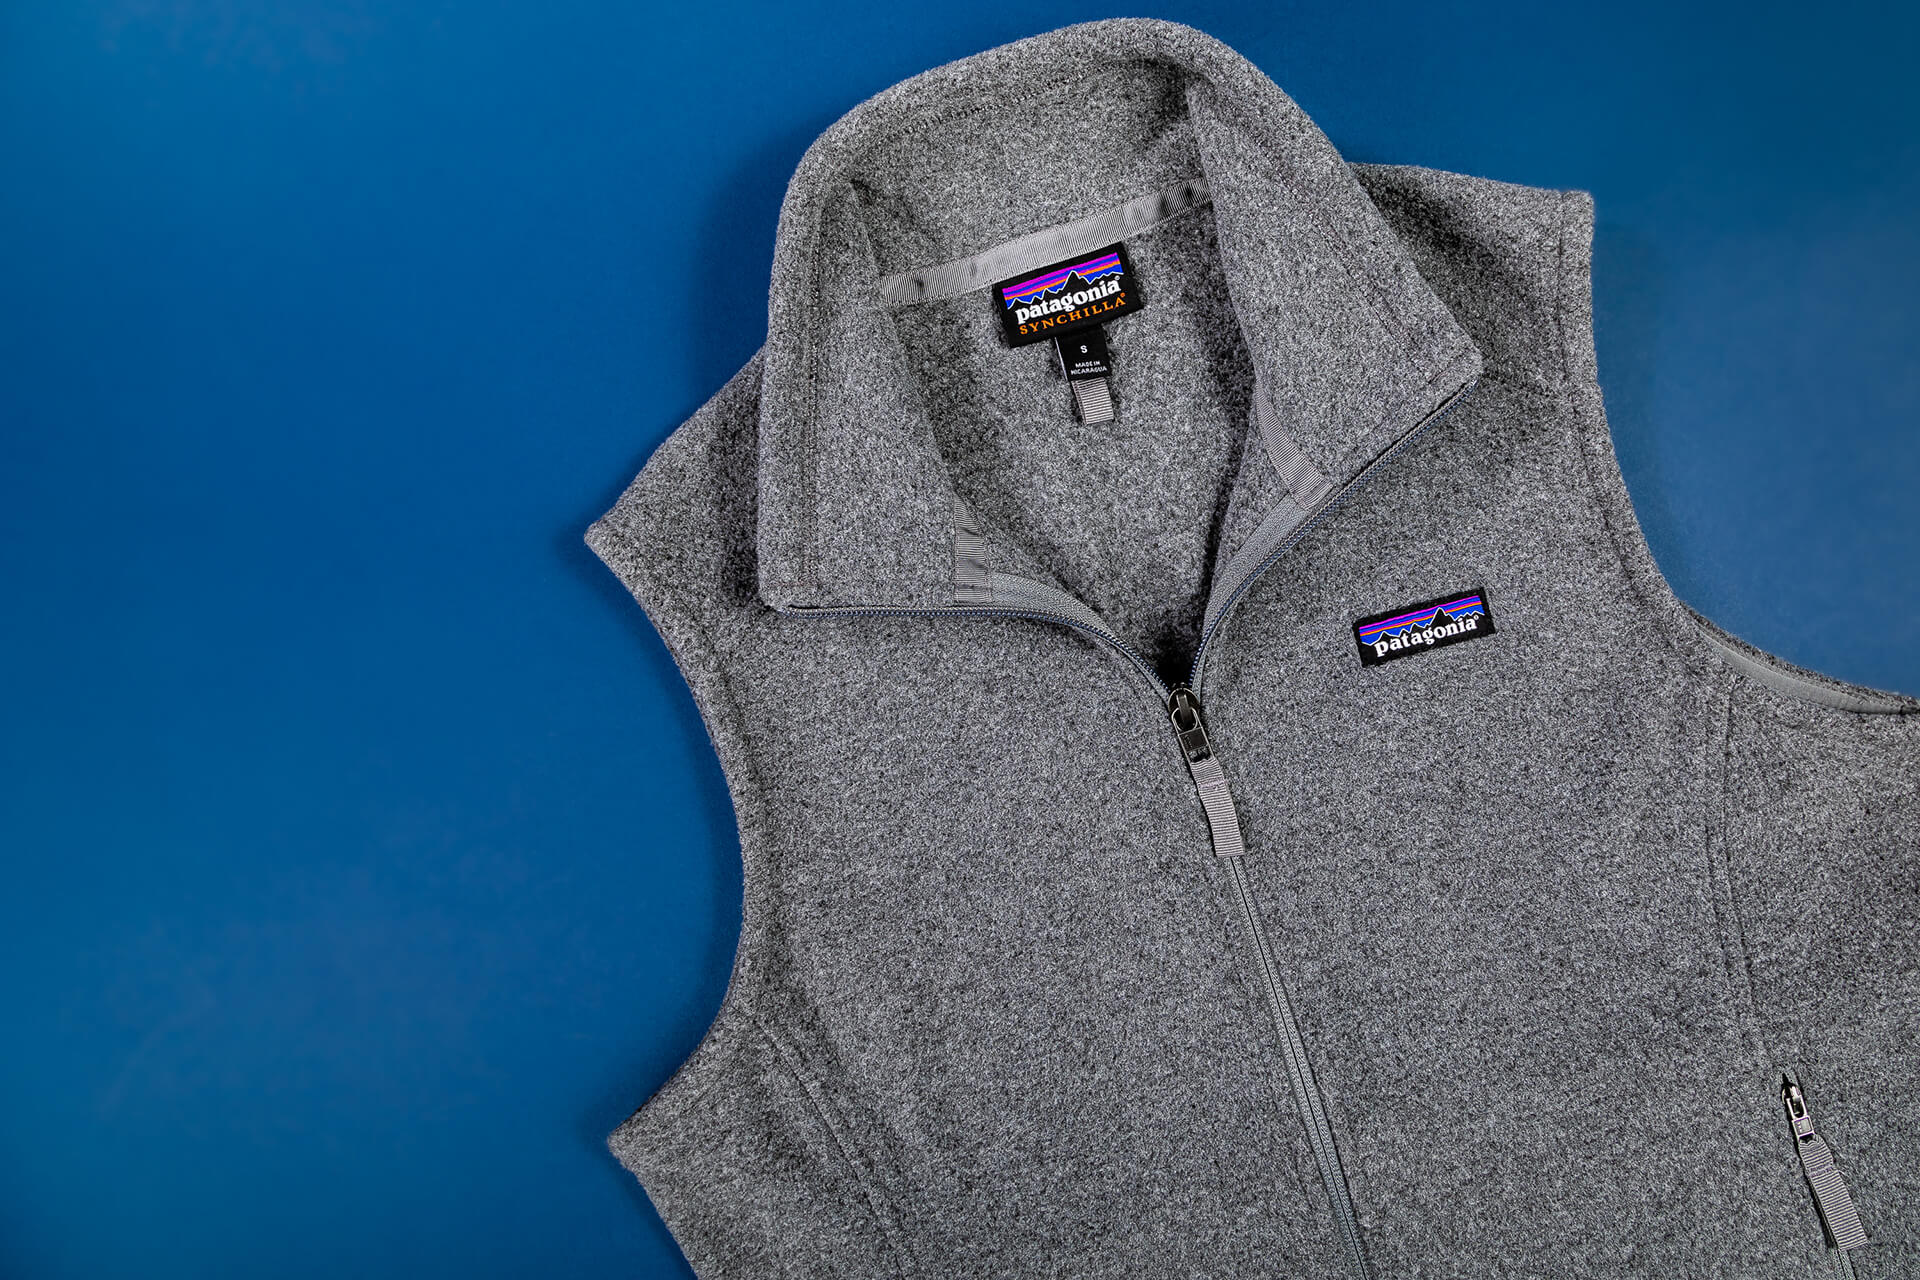 Patagonia Clothing & Gear Your Employees Deserve